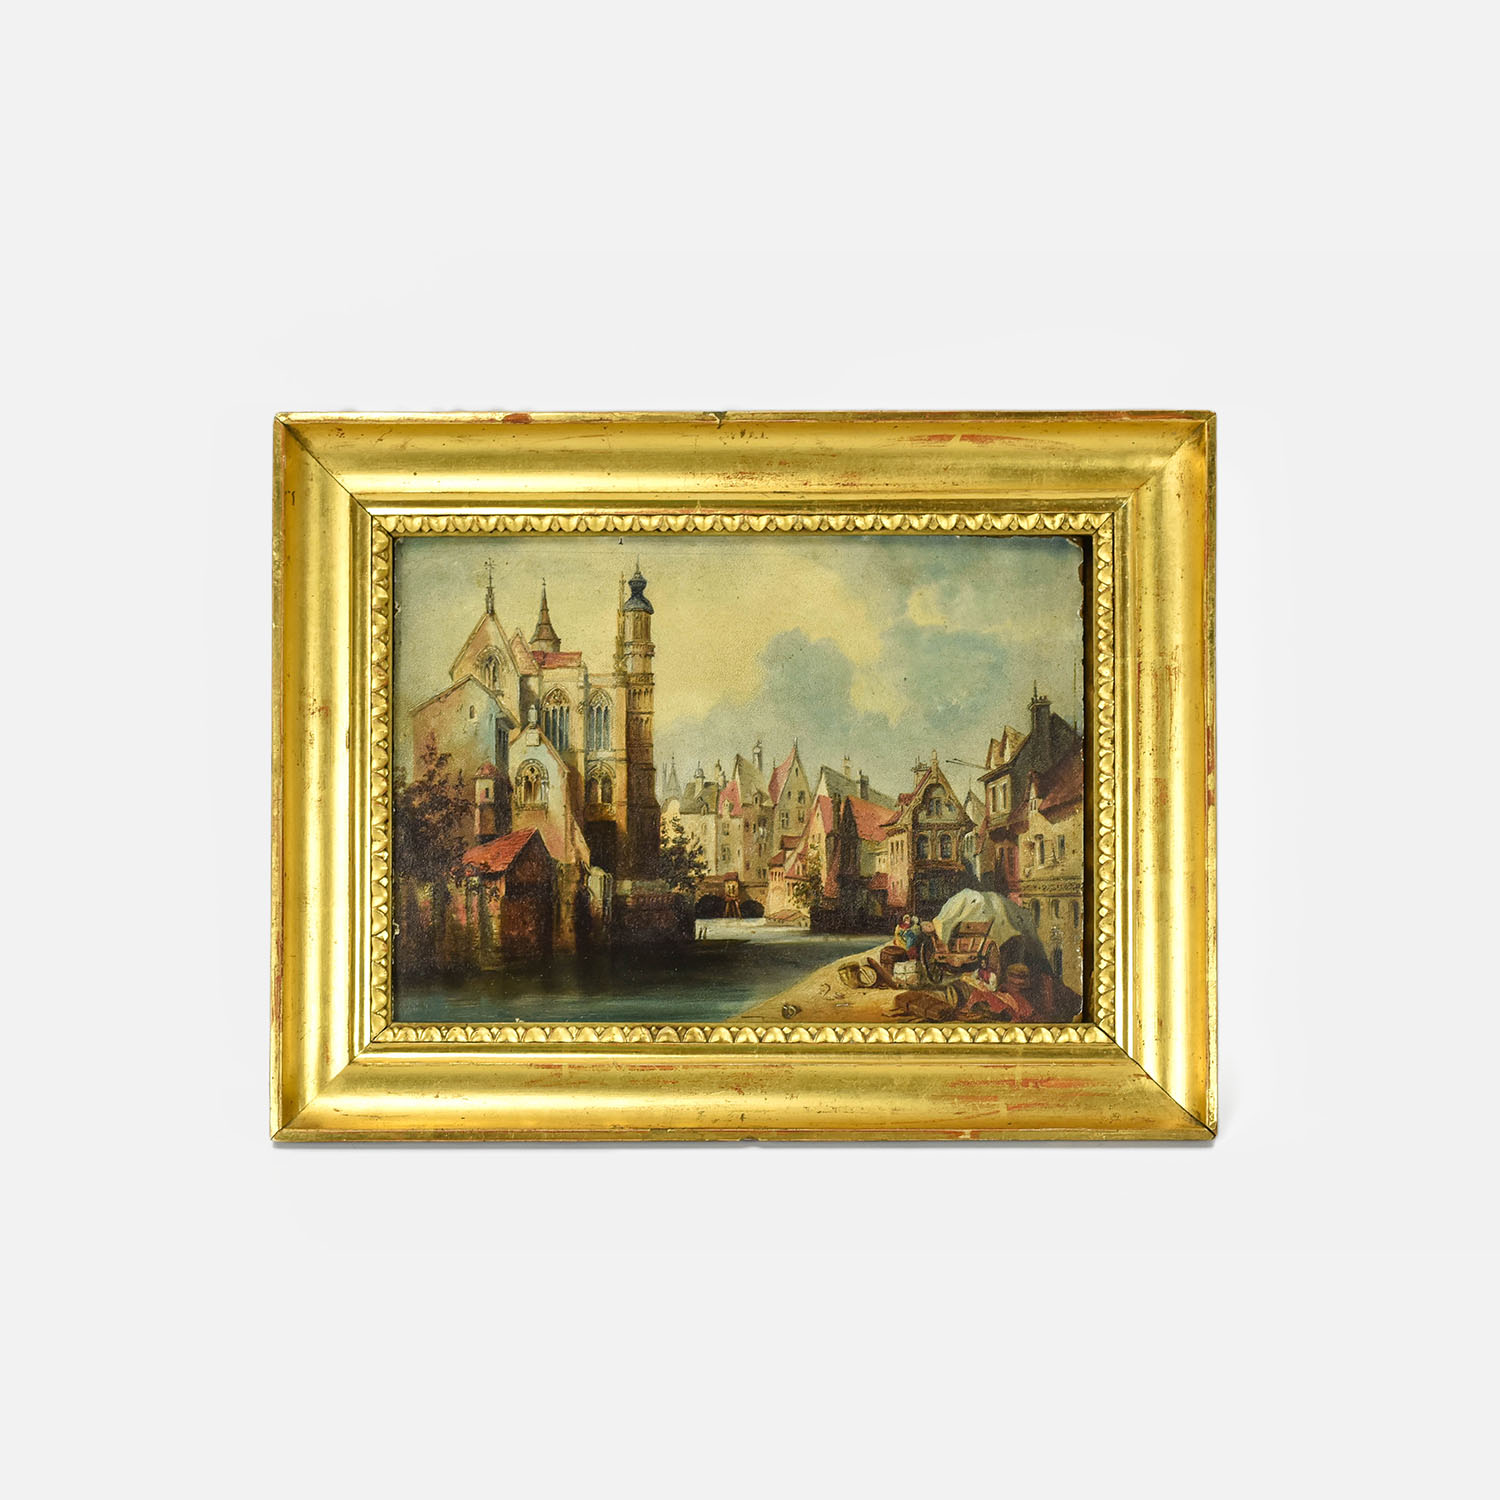 Antique European Cityscape Oil Painting on Board